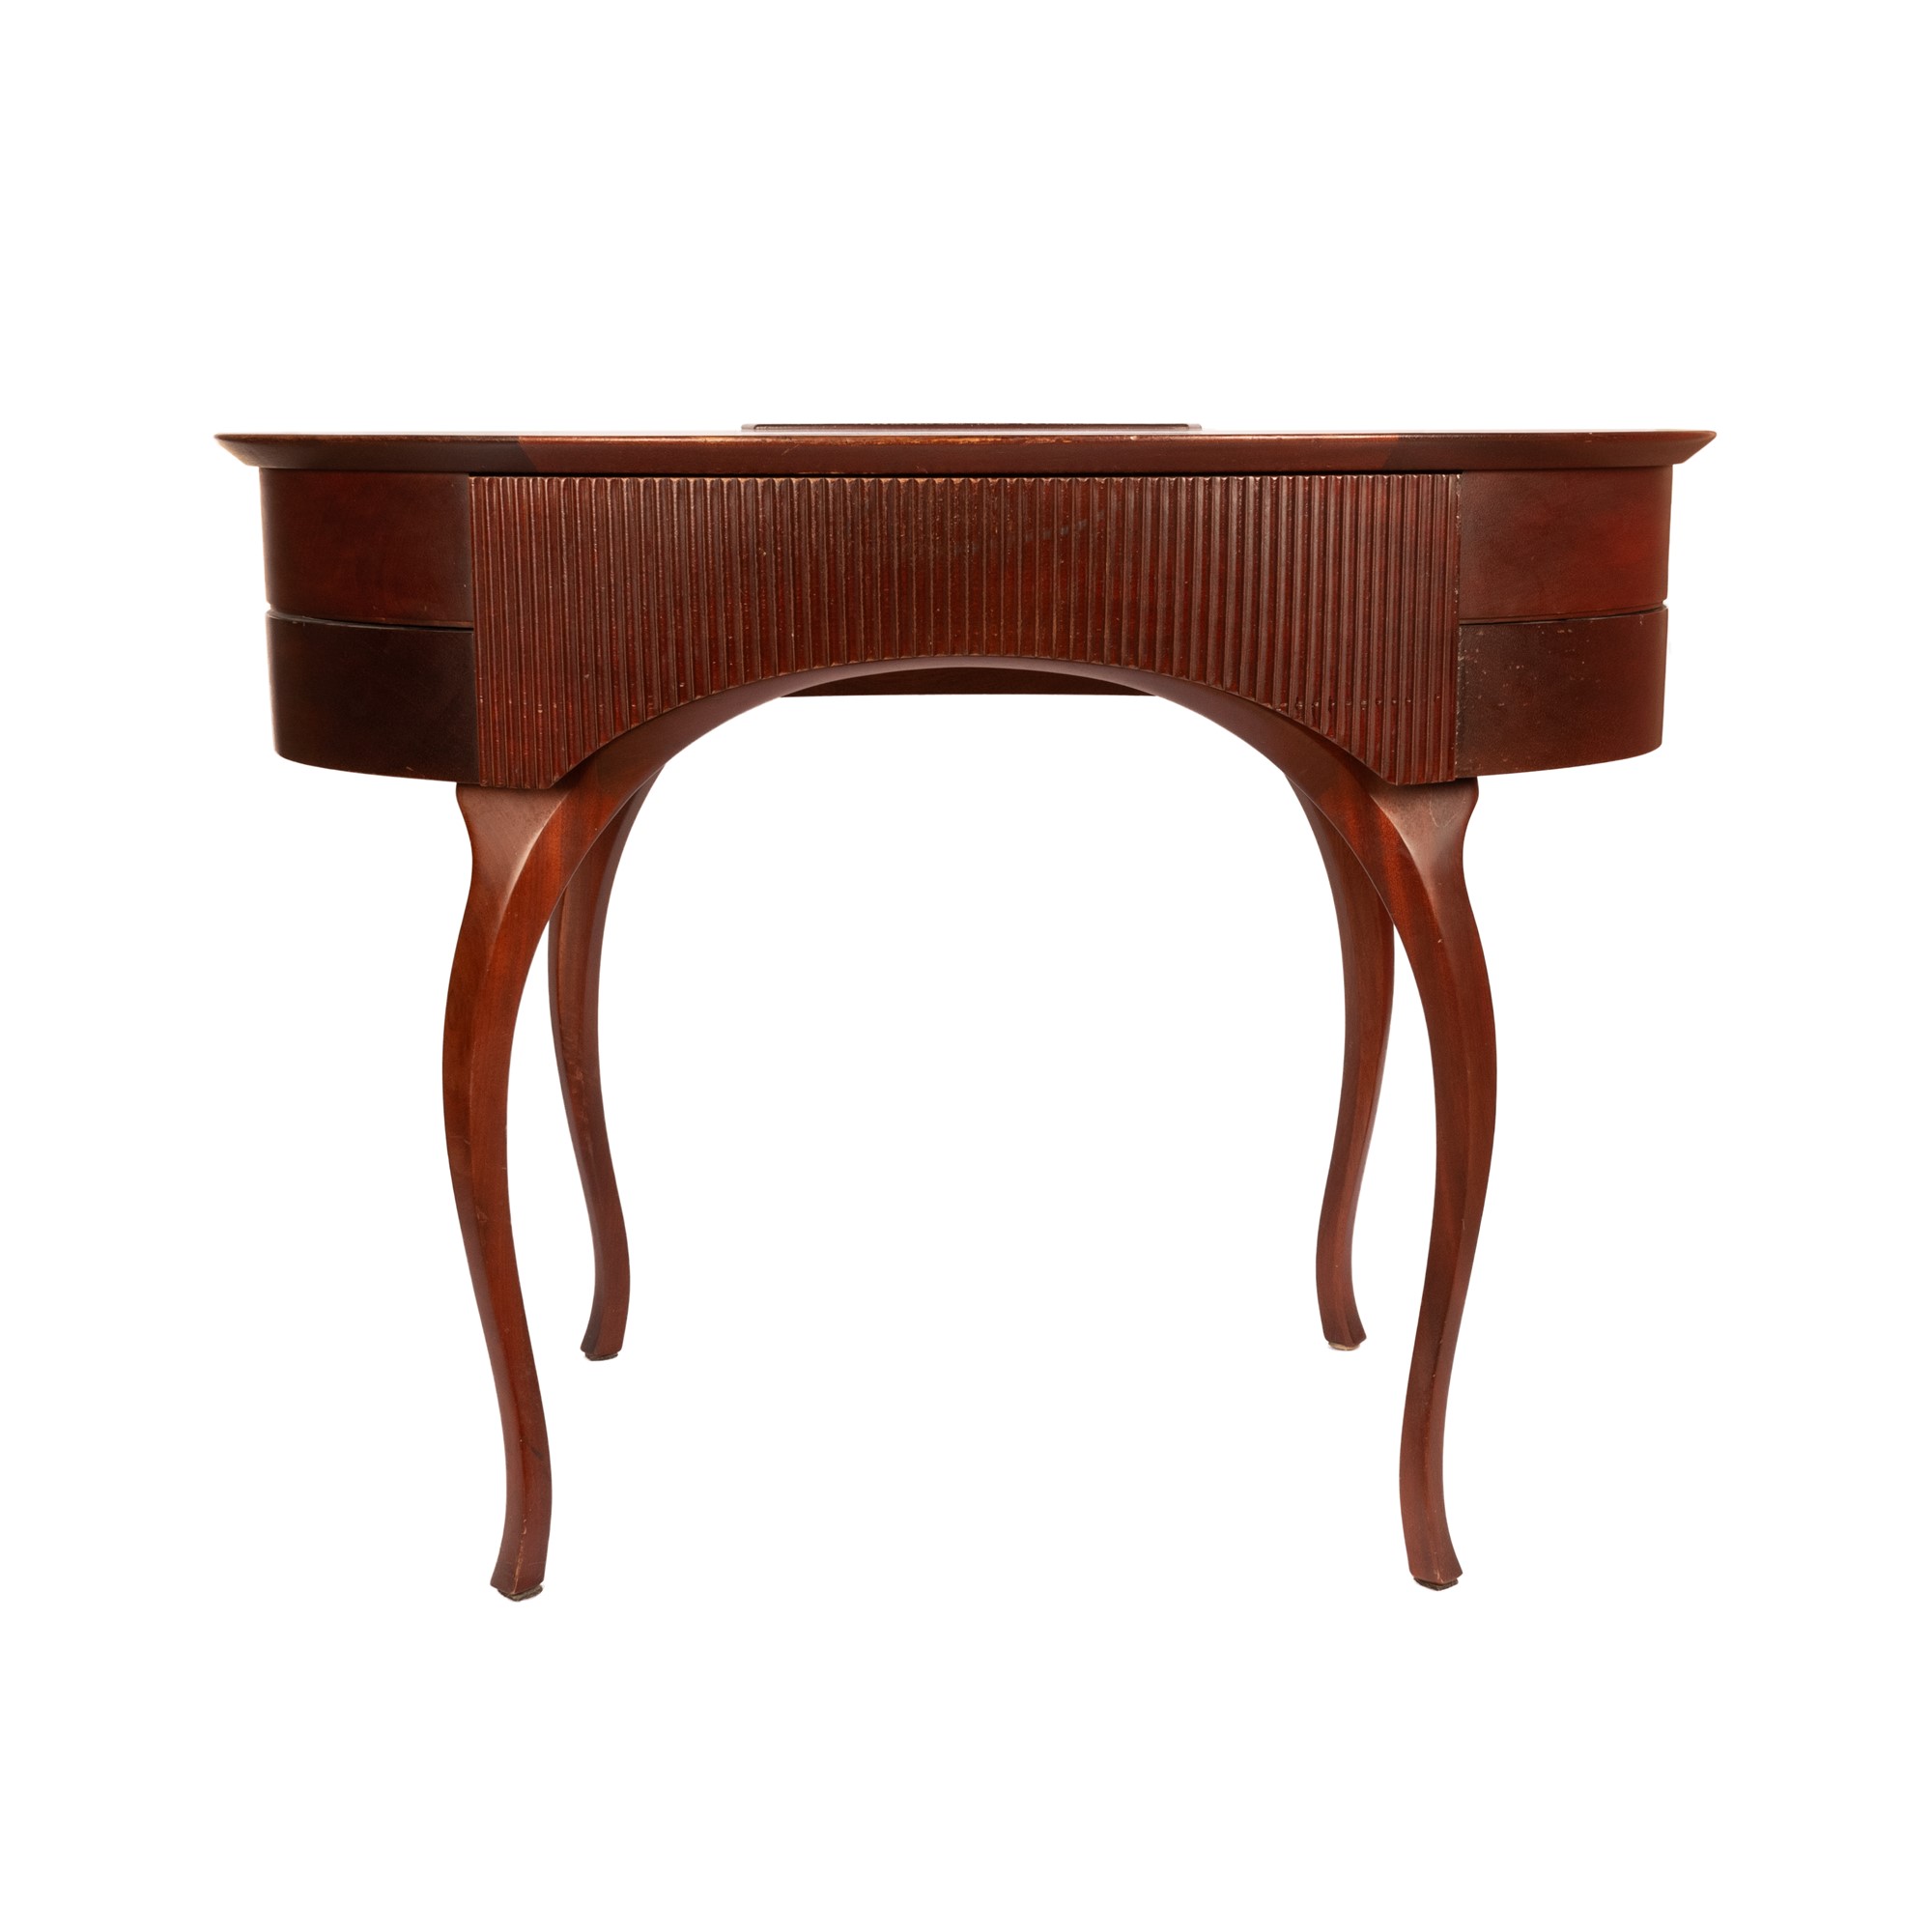 Writing desk in cherry wood - Image 20 of 25